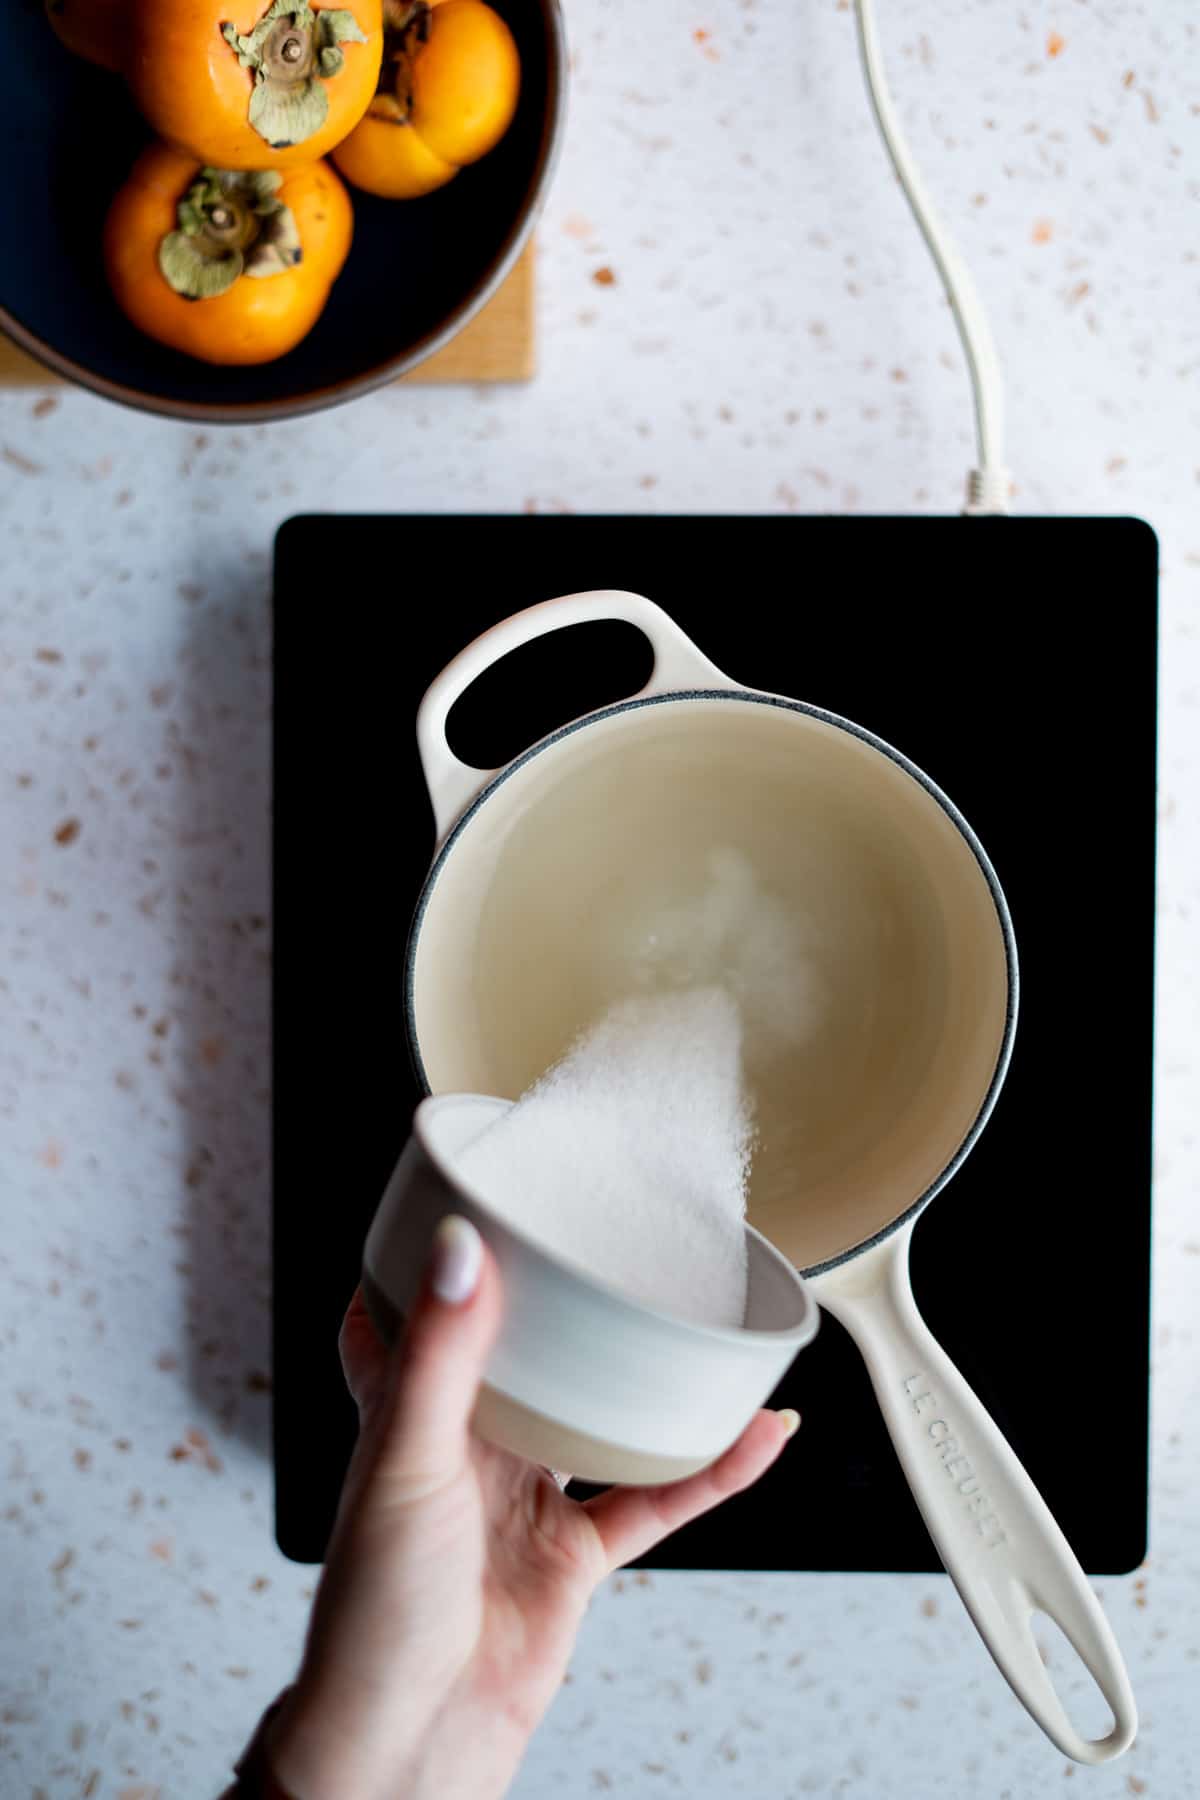 A hand from out of frame is pouring a bowl of sugar into a saucepan filled with water.